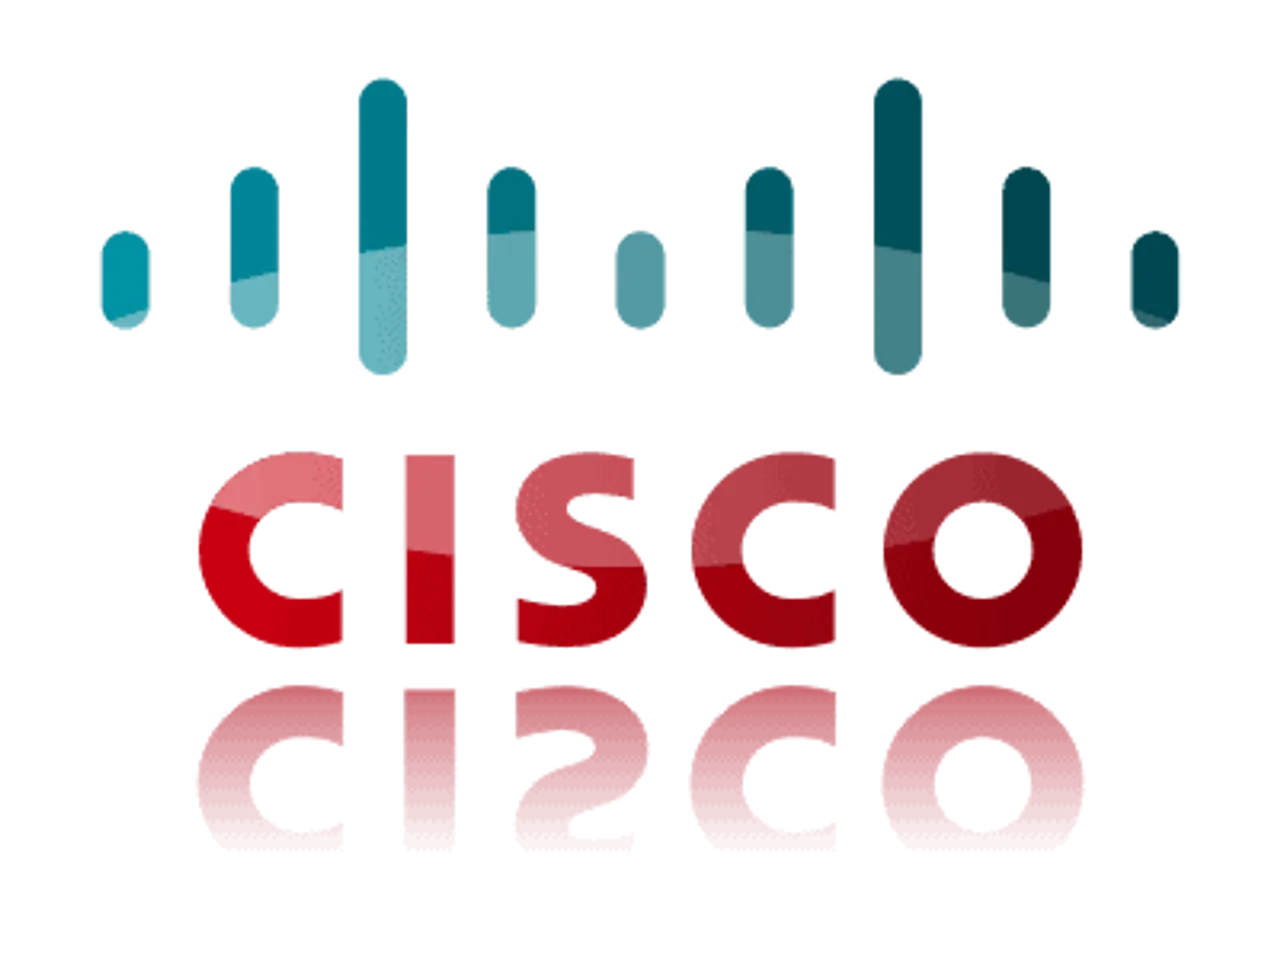 Cisco launches Infinite Suite of Cloud Video Solutions to Help Service Providers